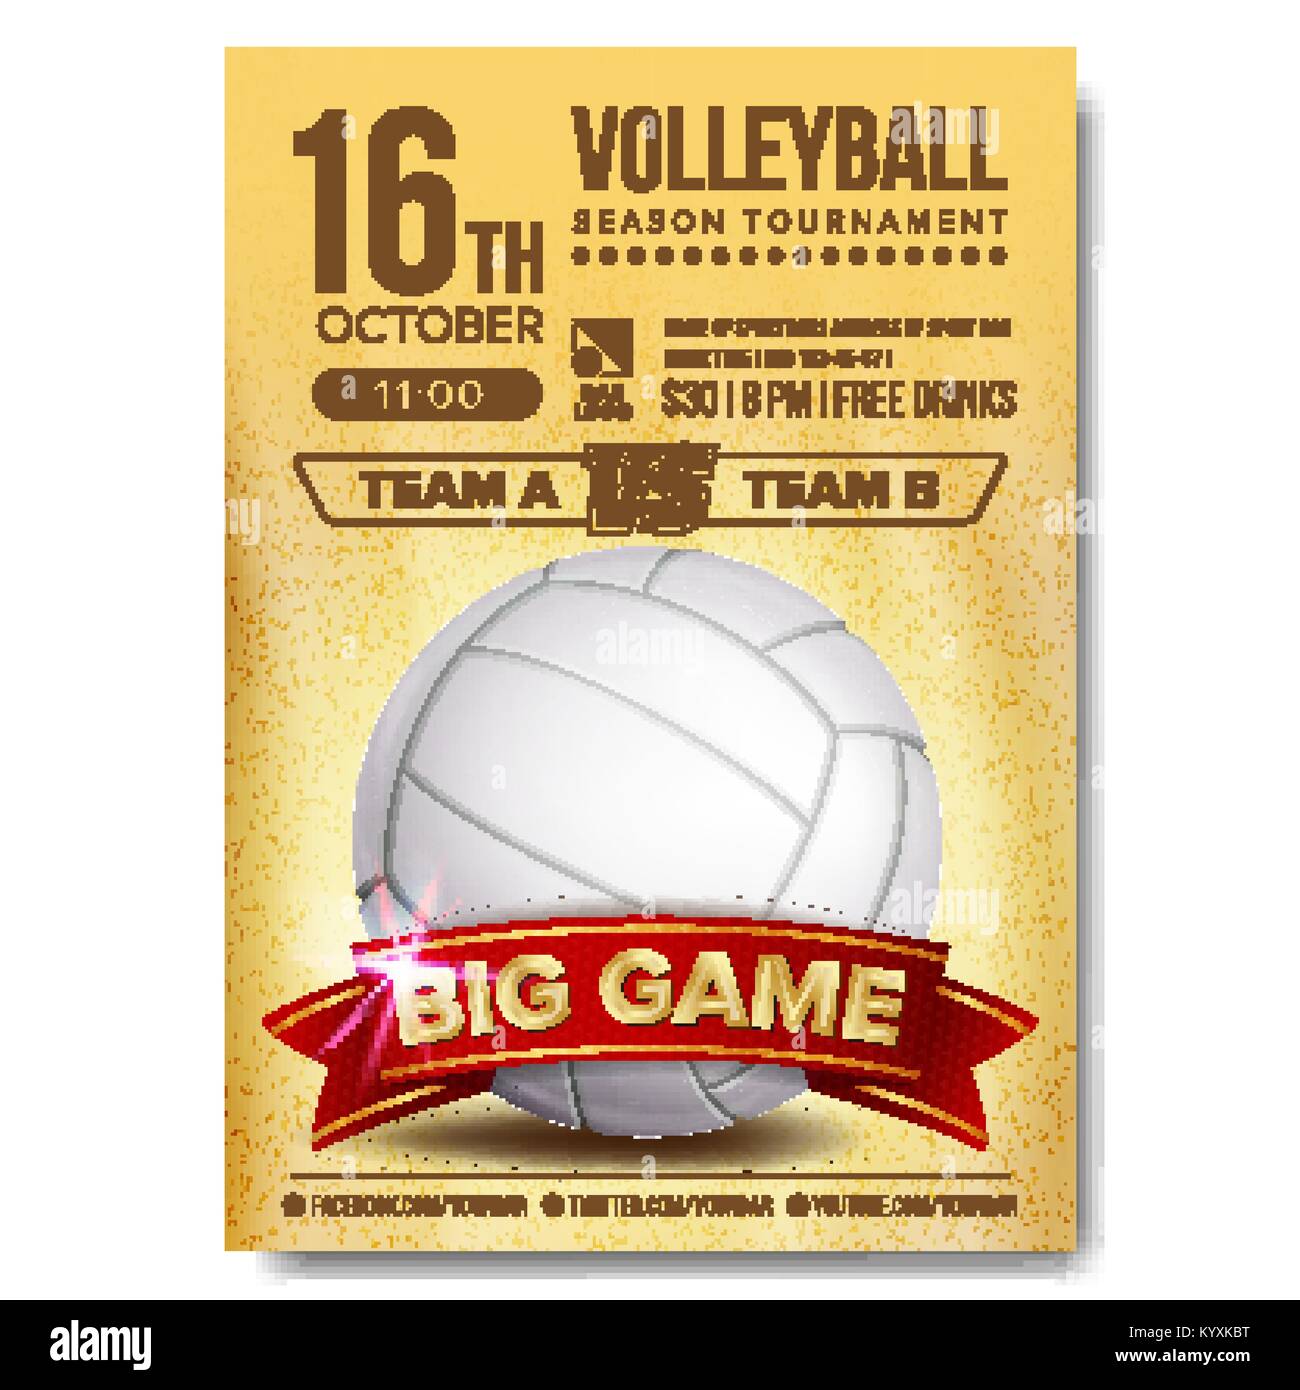 Volleyball Poster Vector. Volleyball Ball. Sand Beach. Design For Sport Bar Promotion. Vertical Volleyball Club, Flyer. Championship Invitation Illustration Stock Vector